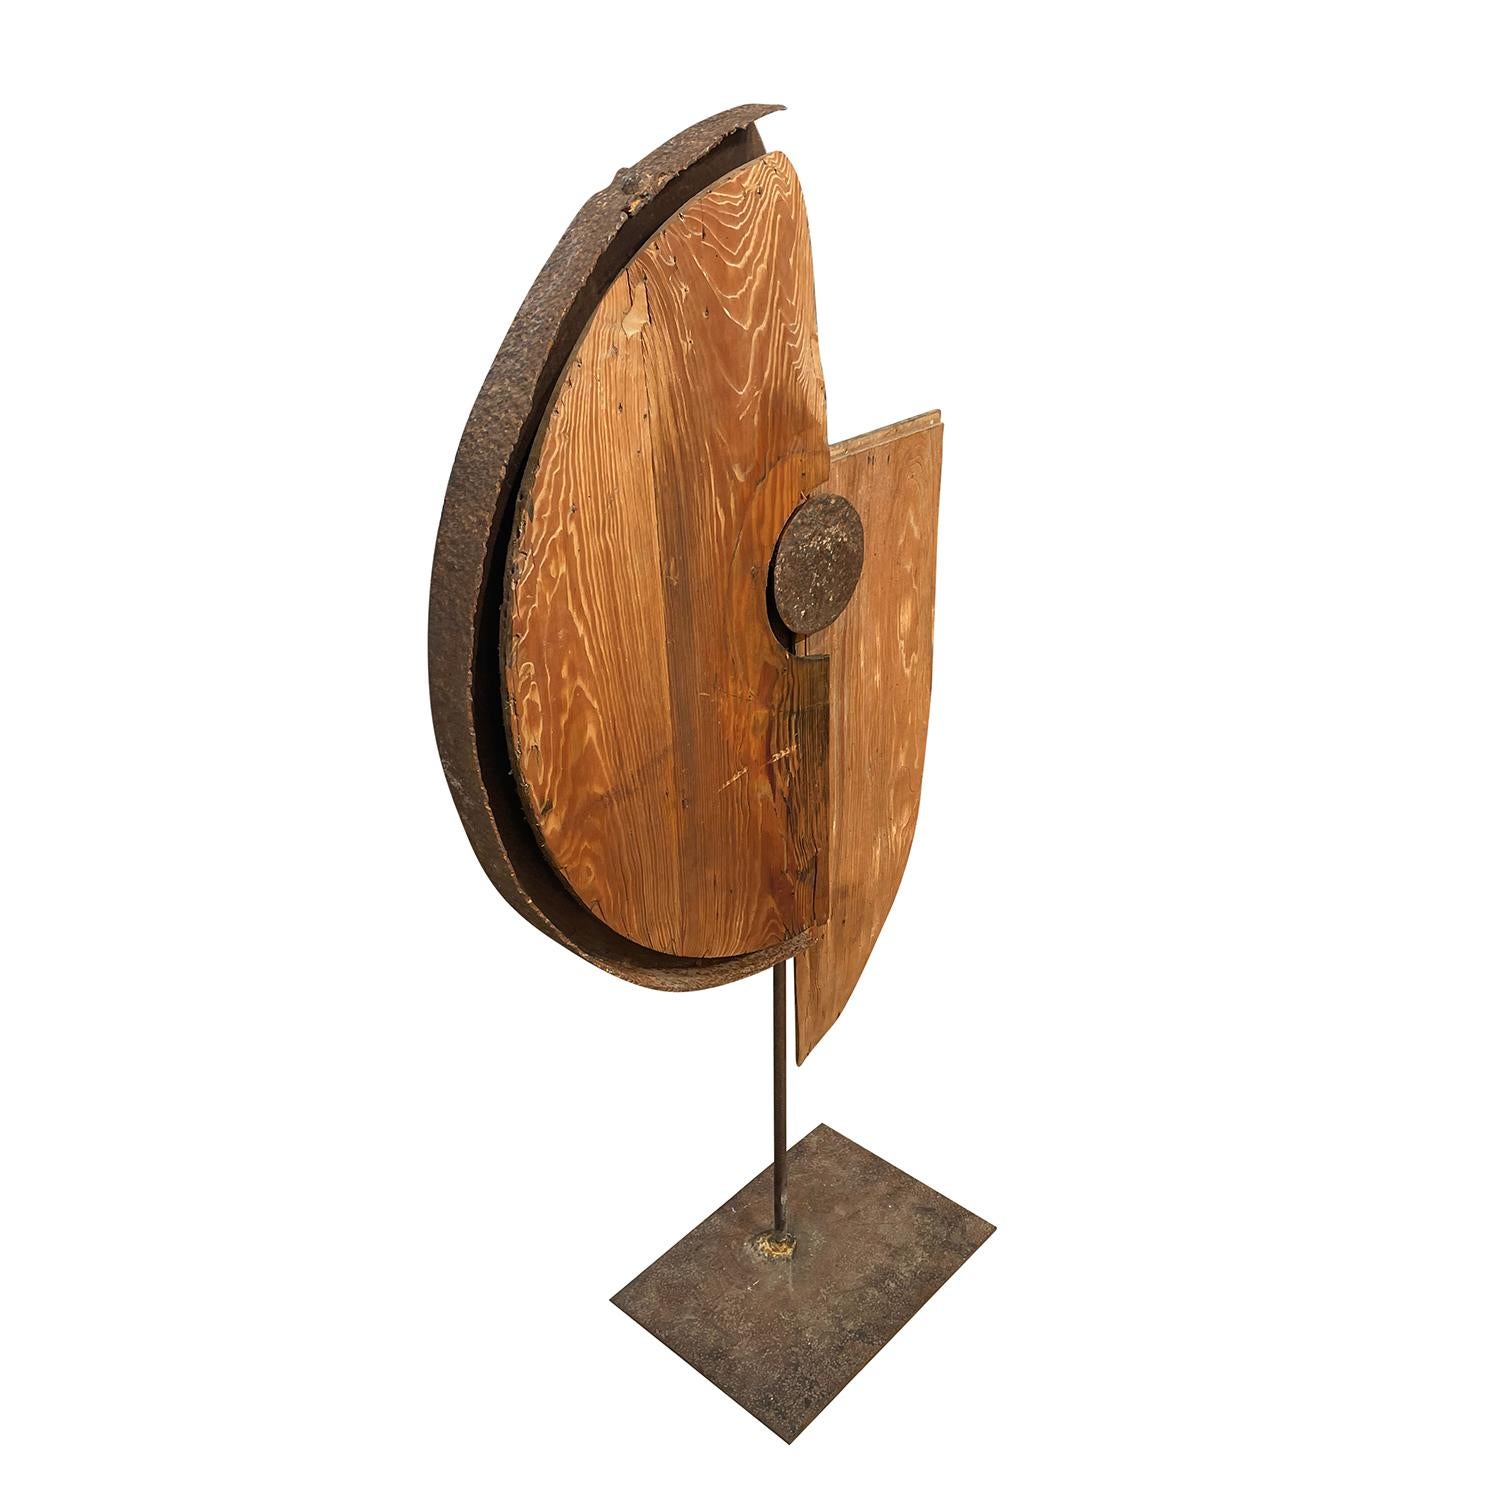 An antique French Industrial abstract sculptural made of hand crafted Metal and Walnut in the Style of Sonia Delaunay, in good condition. The detailed décor piece is particularized with geometrical shapes. Minor fading, due to age. Wear consistent